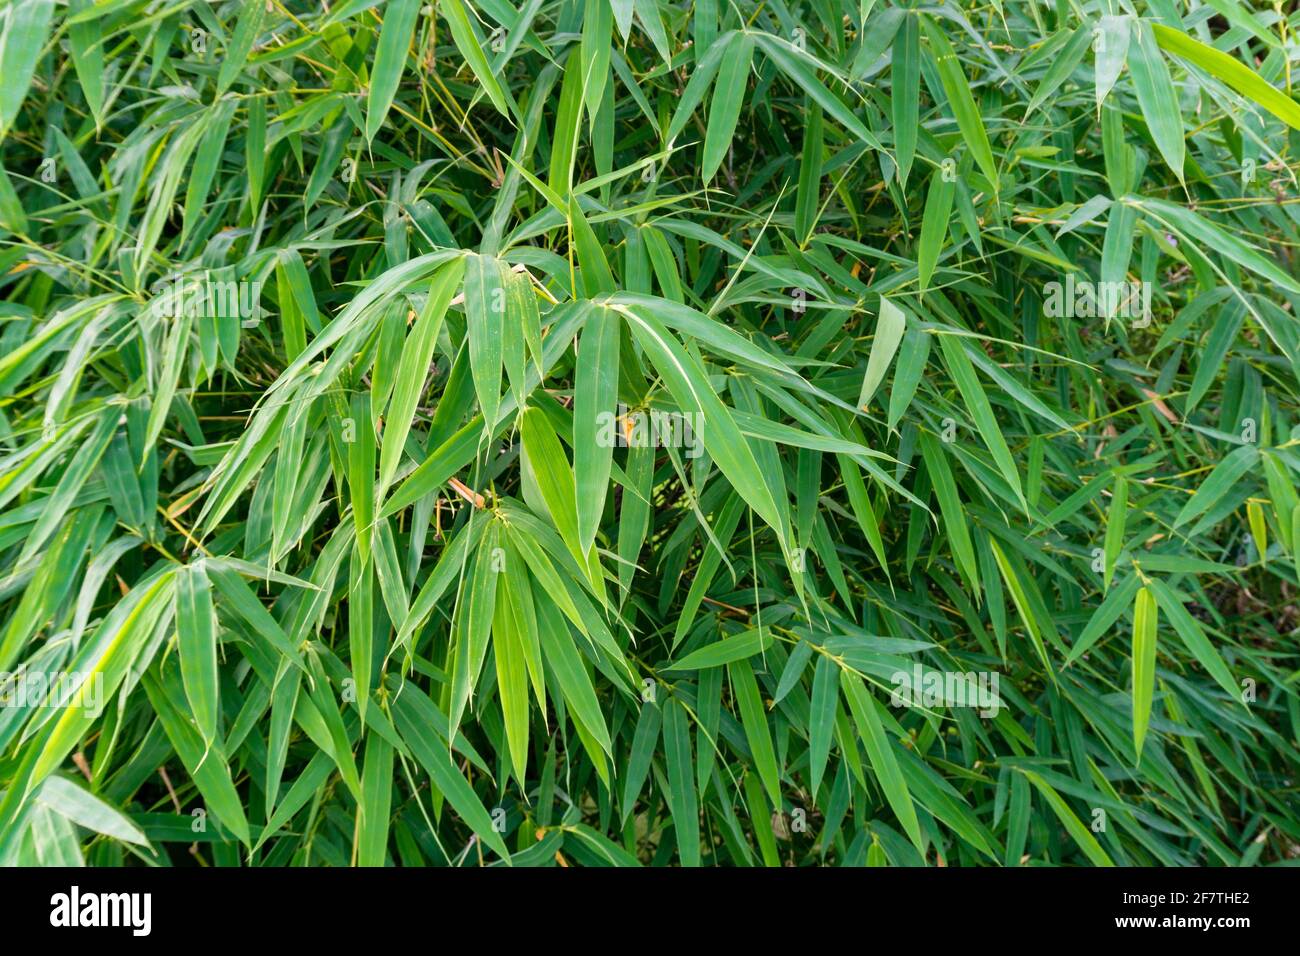 Bamboo Leaves. Bambusa tulda, or Indian timber bamboo, is considered to be one of the most useful of bamboo species. It is native to the Indian subcon Stock Photo